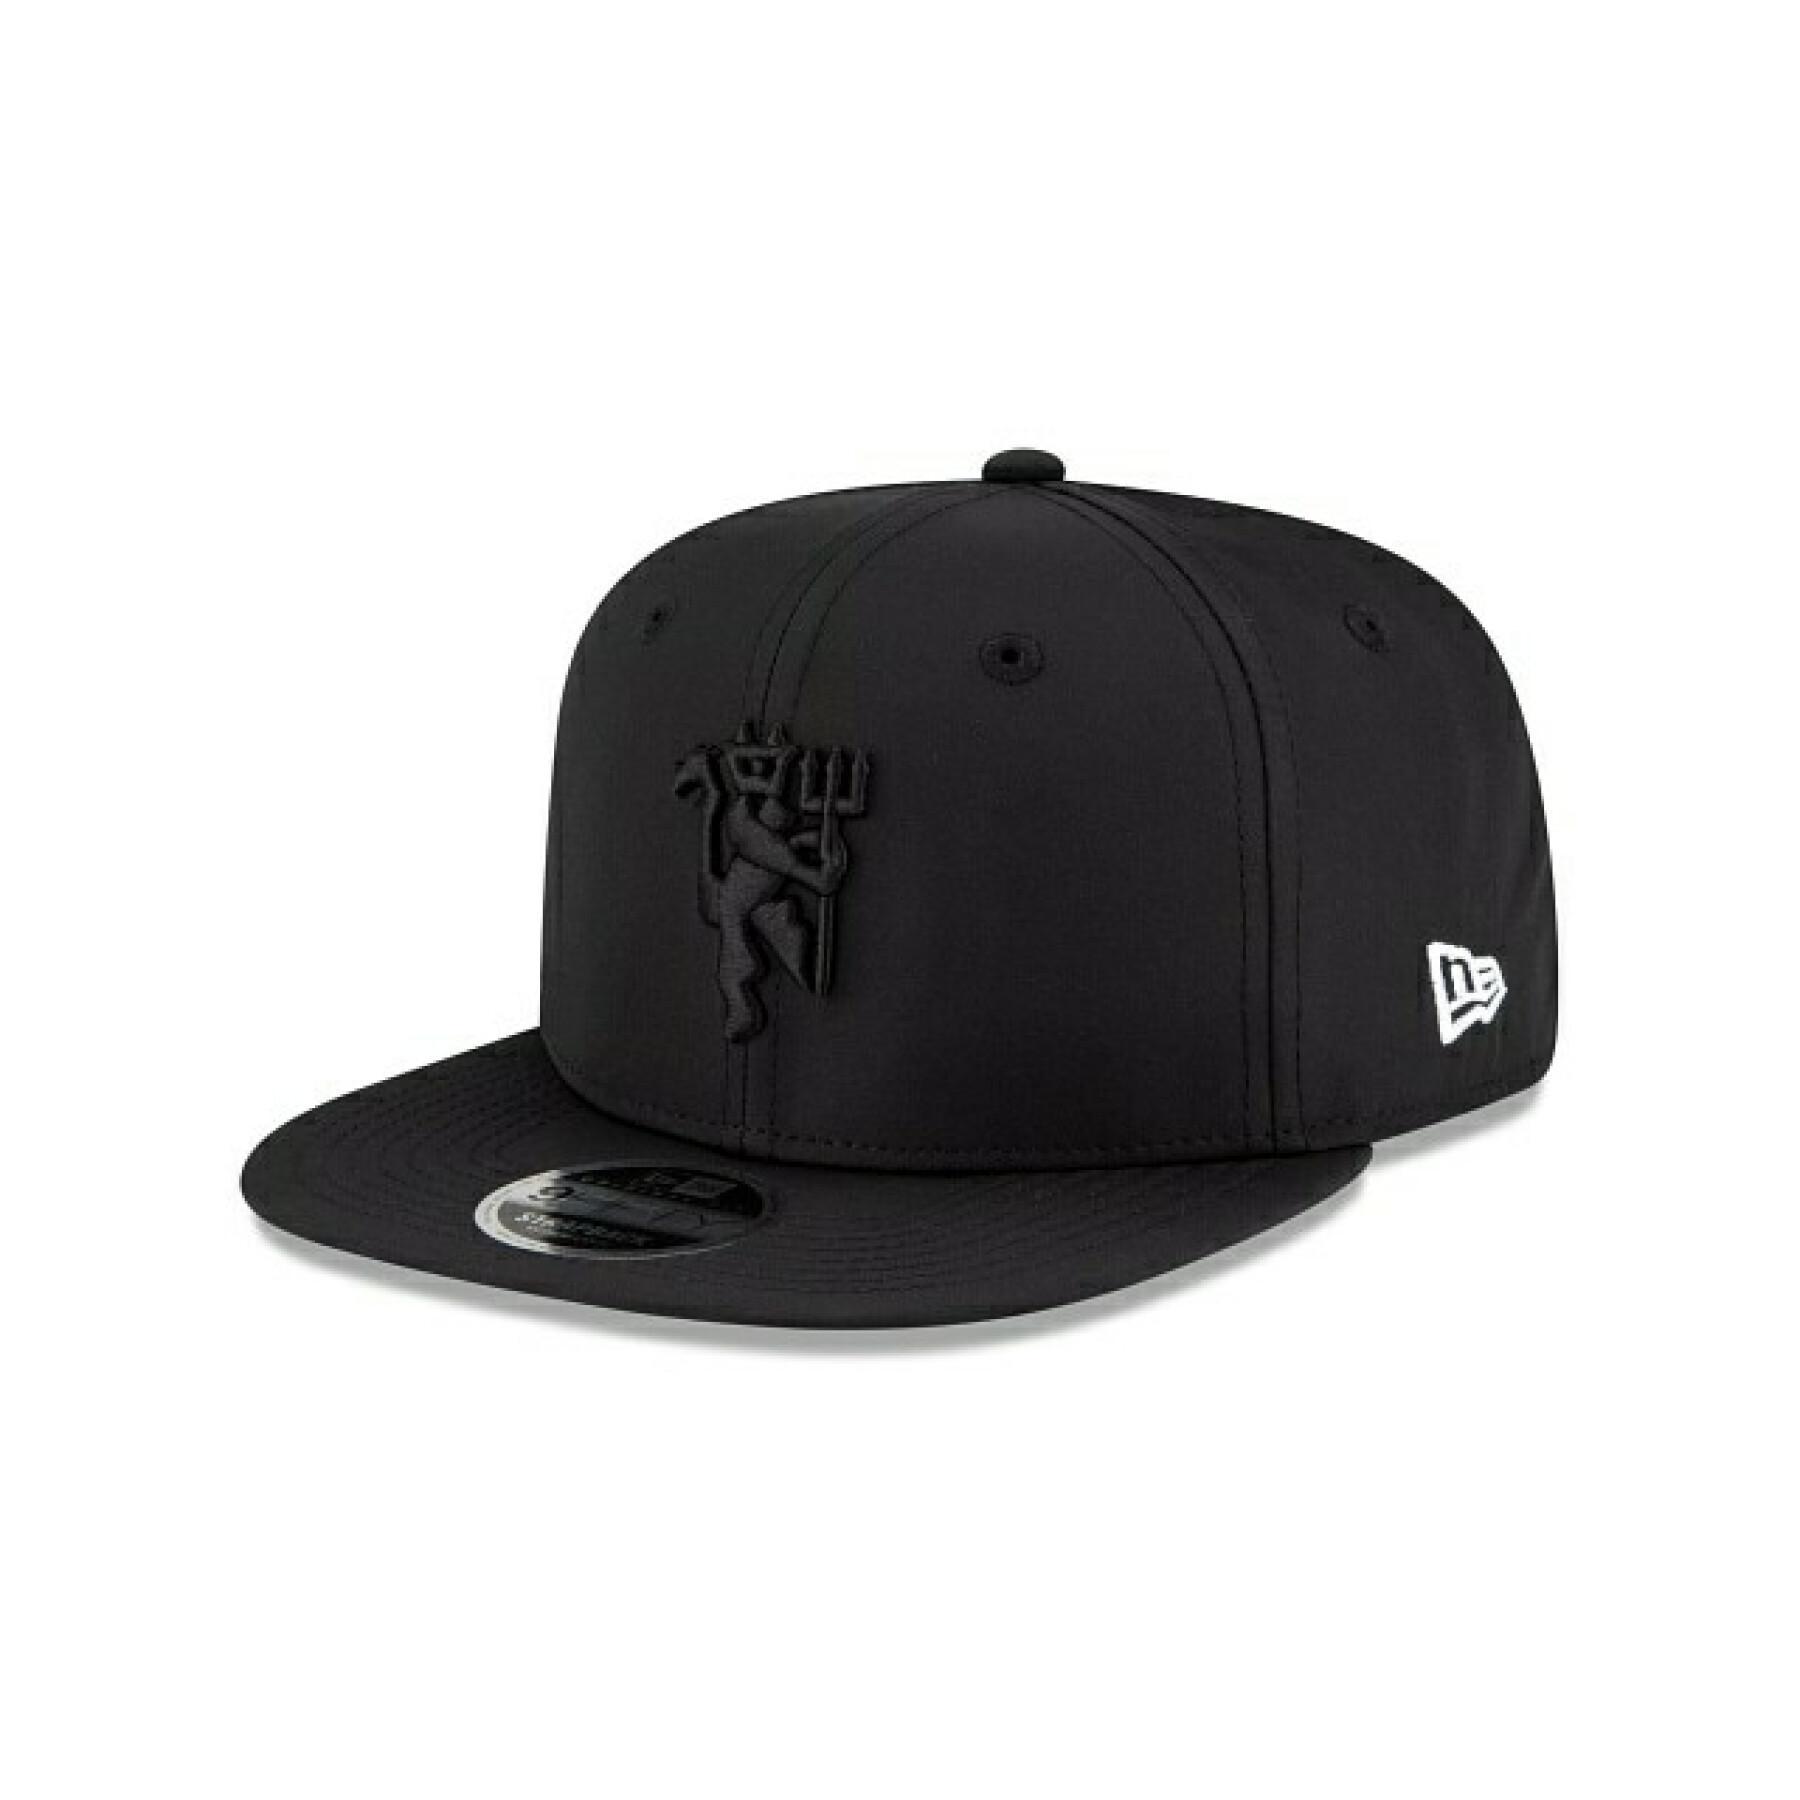 9fifty cap Manchester United 2021/22